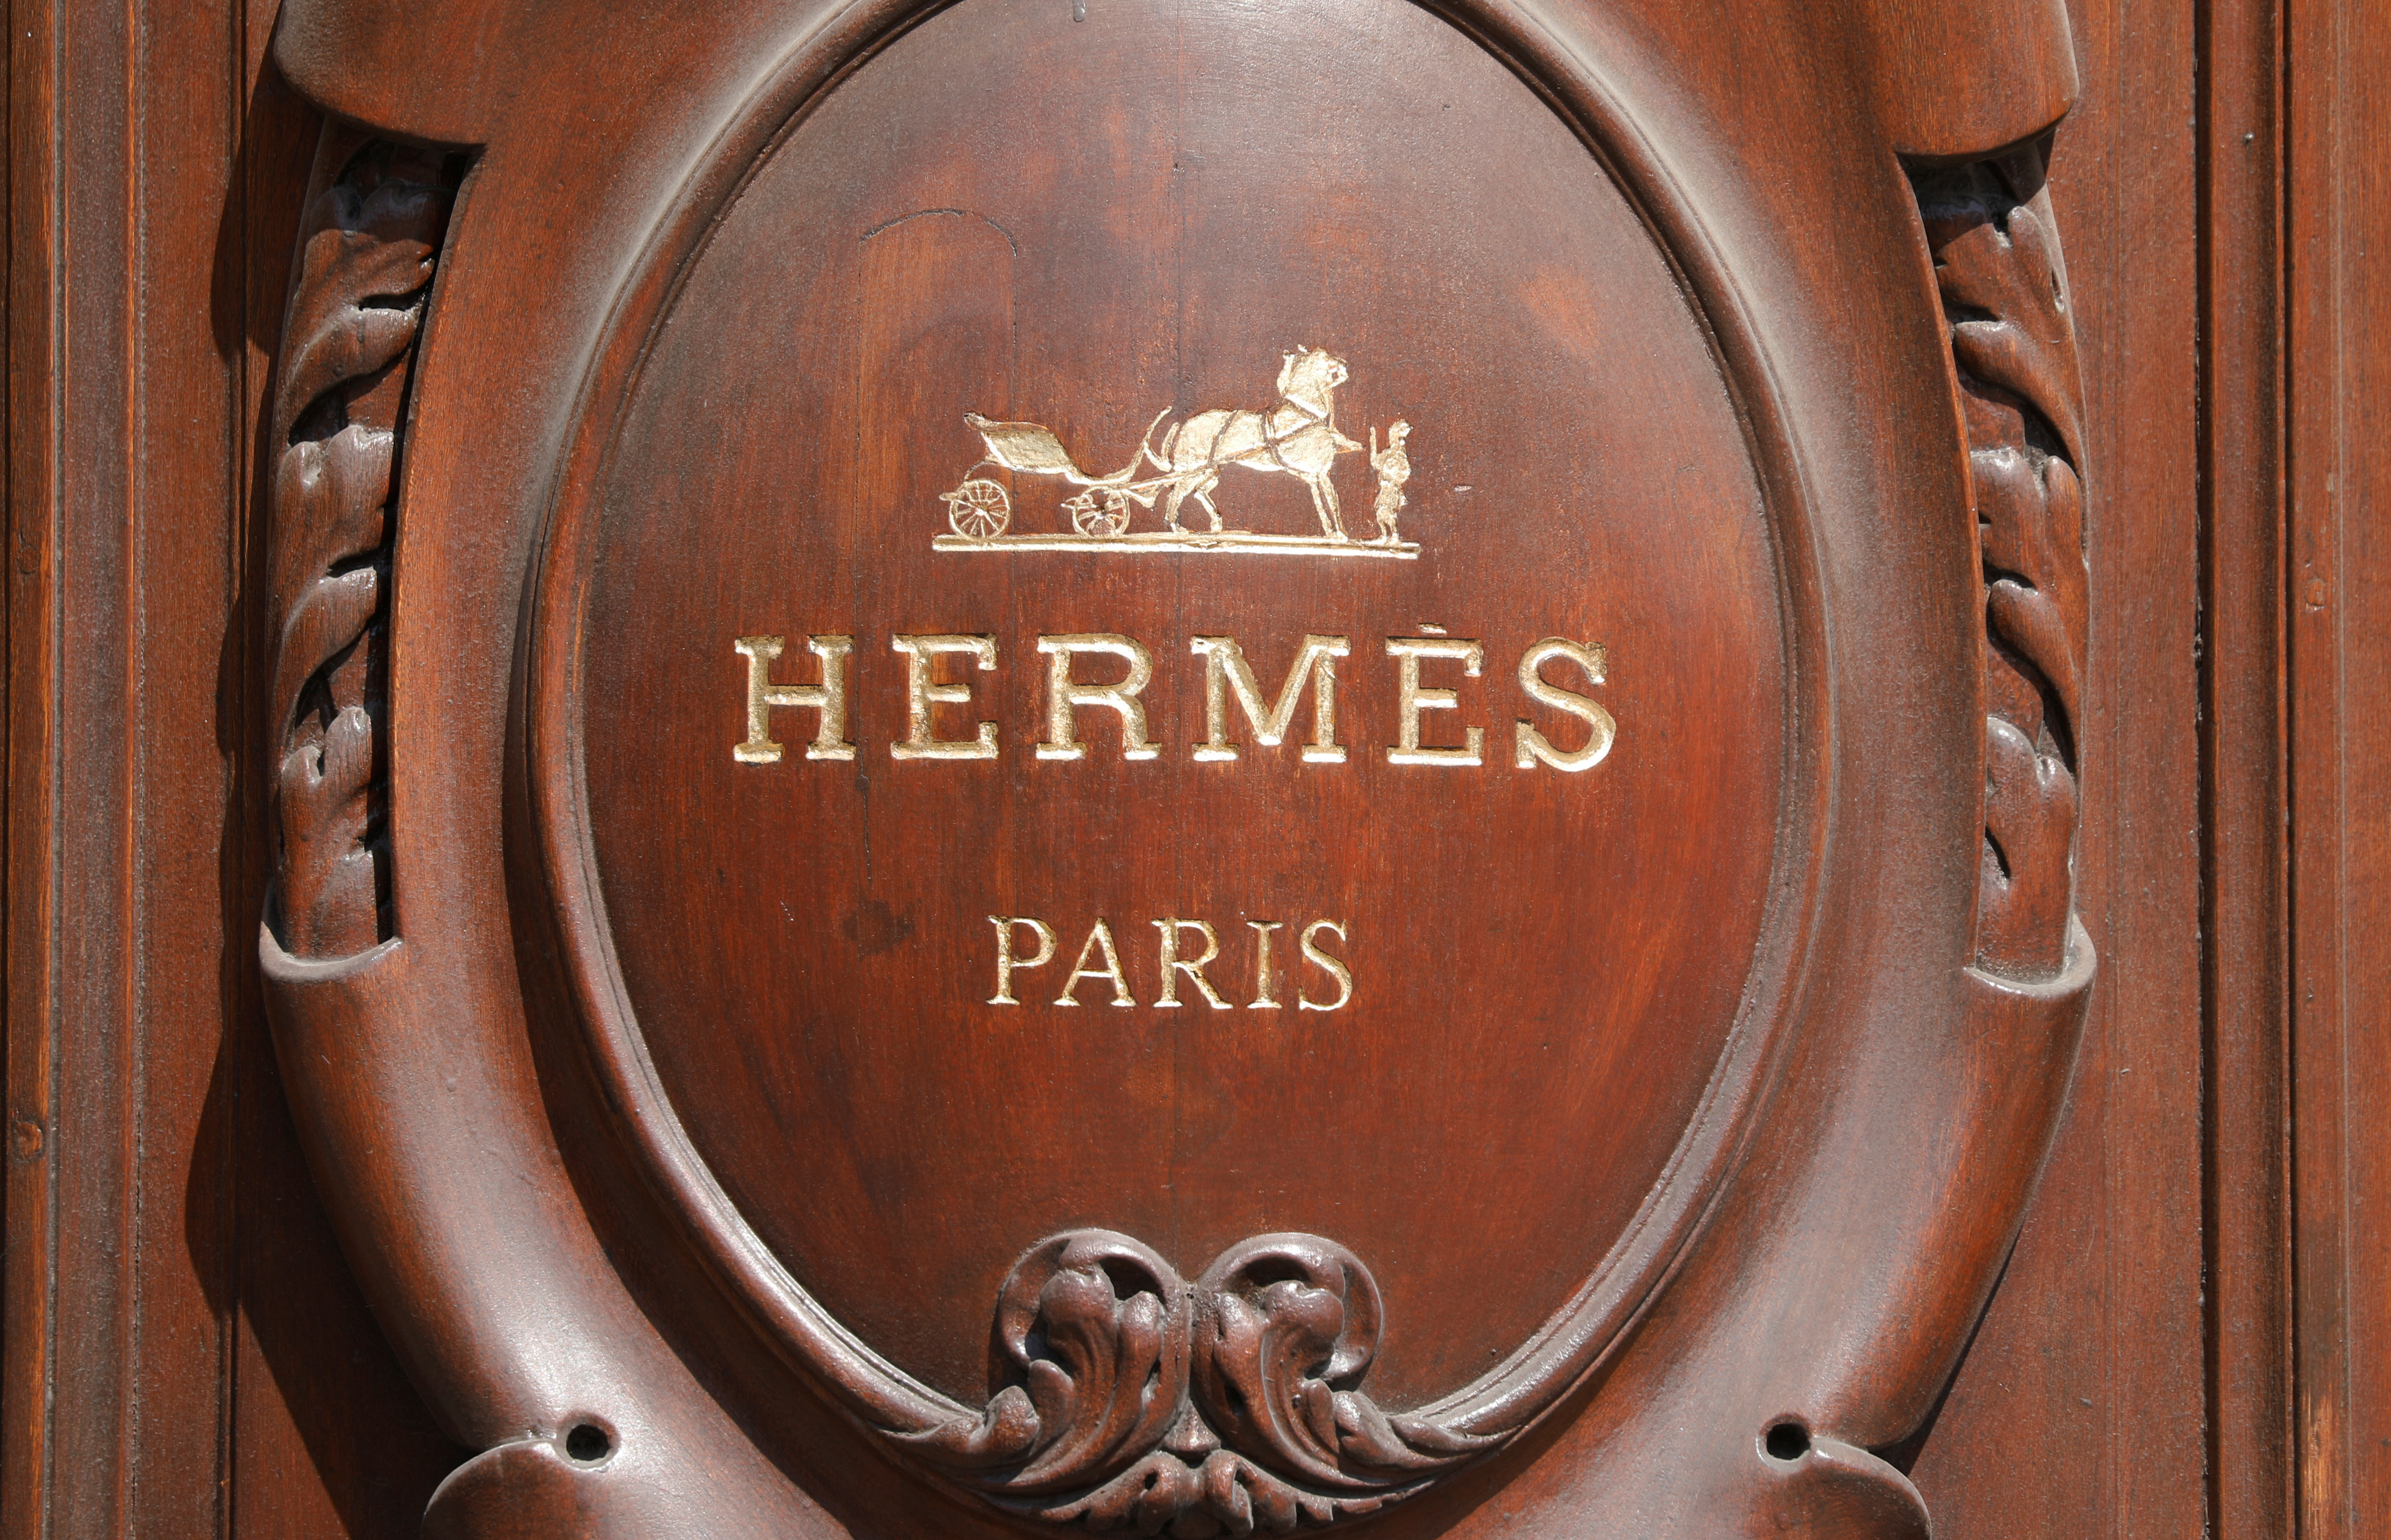 Has Hermès gone too far with its exclusive sales tactics